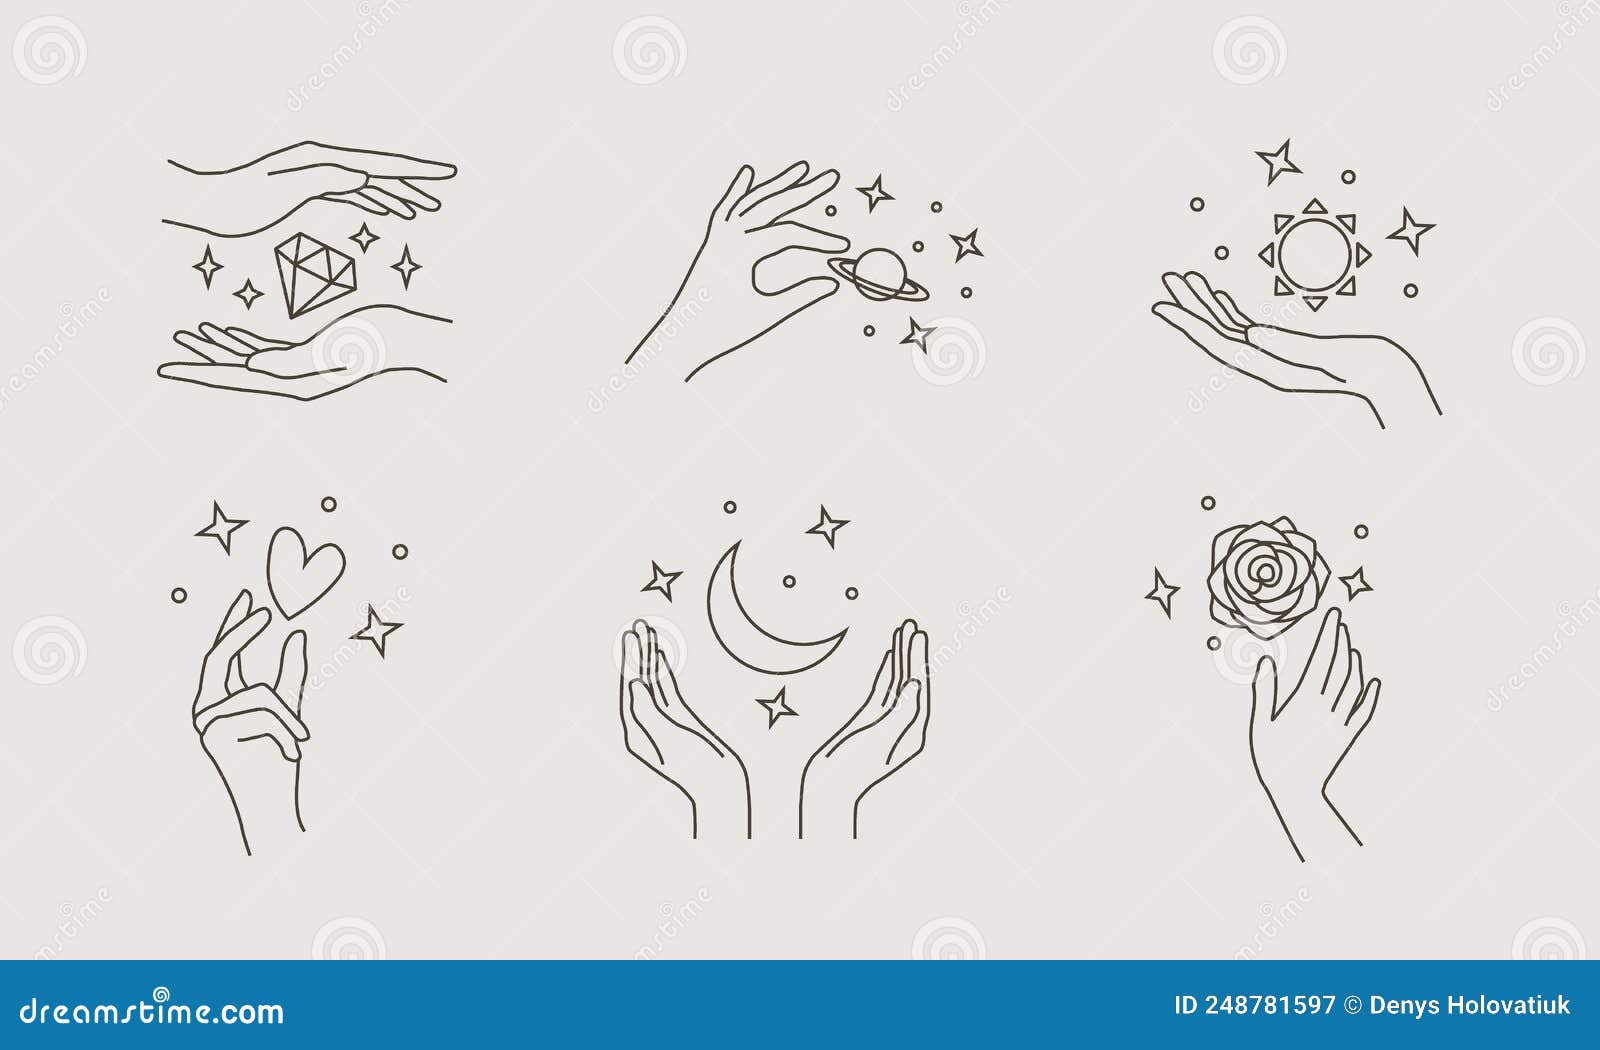 Linear Design with Hands and Simple Elements. Stock Vector ...